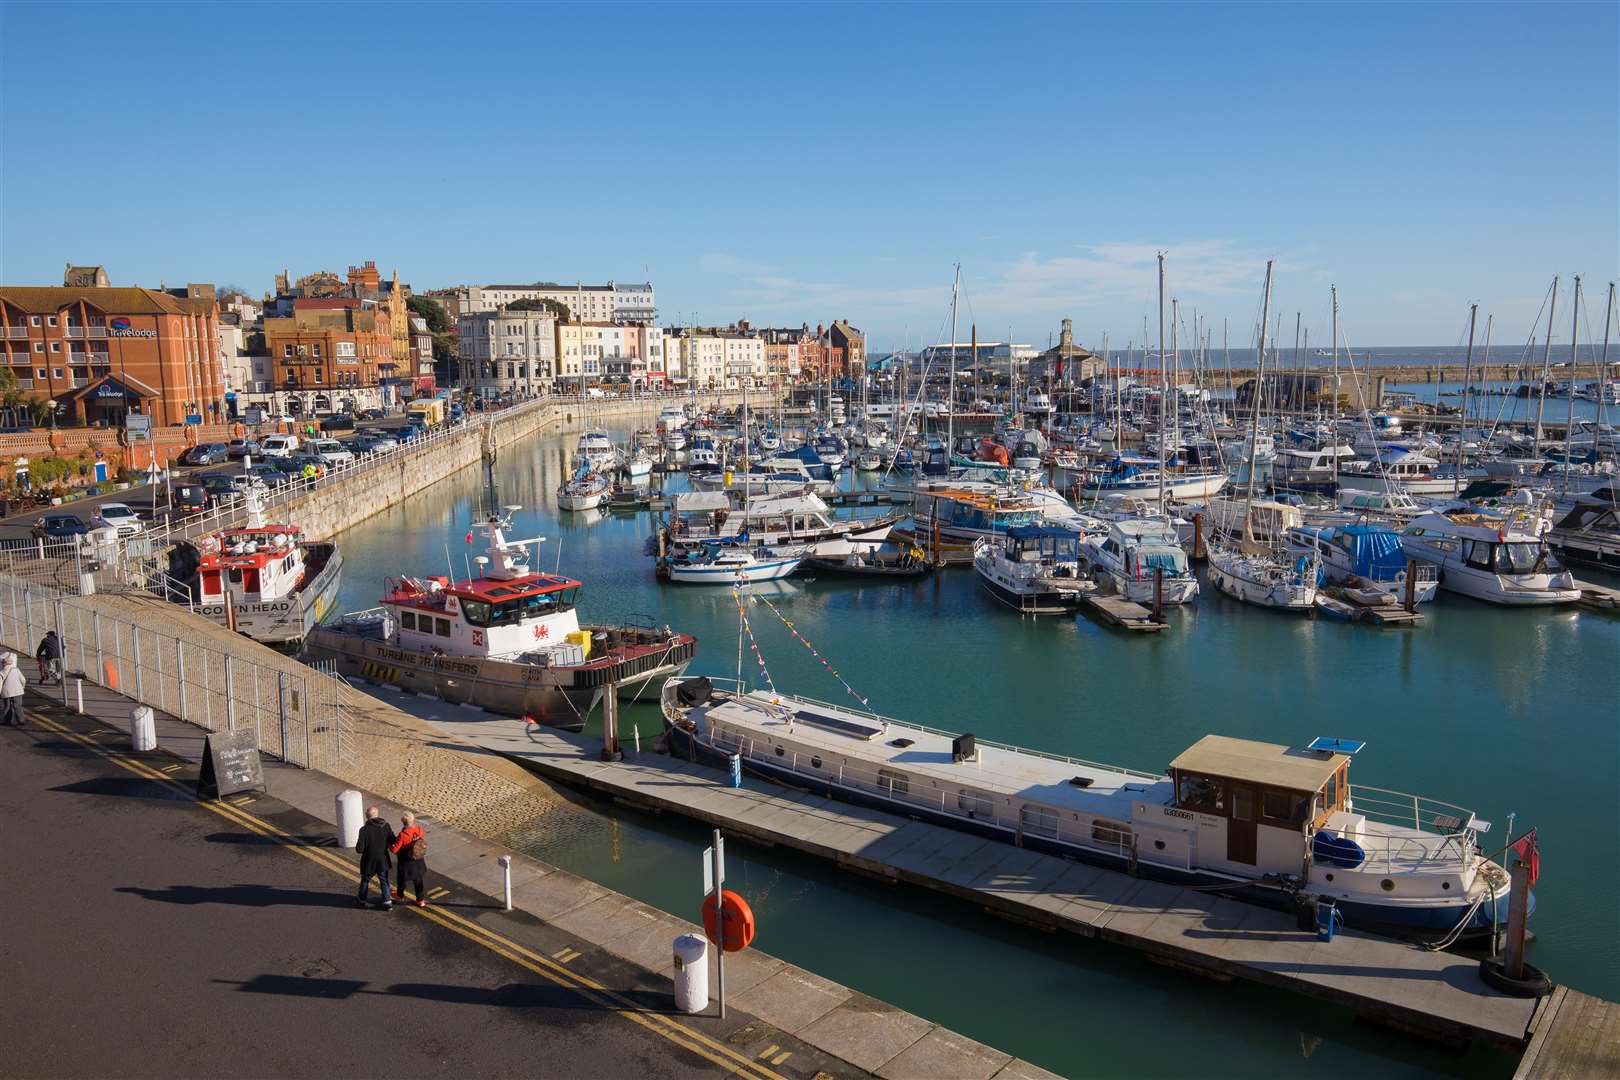 Police were called to Ramsgate harbour